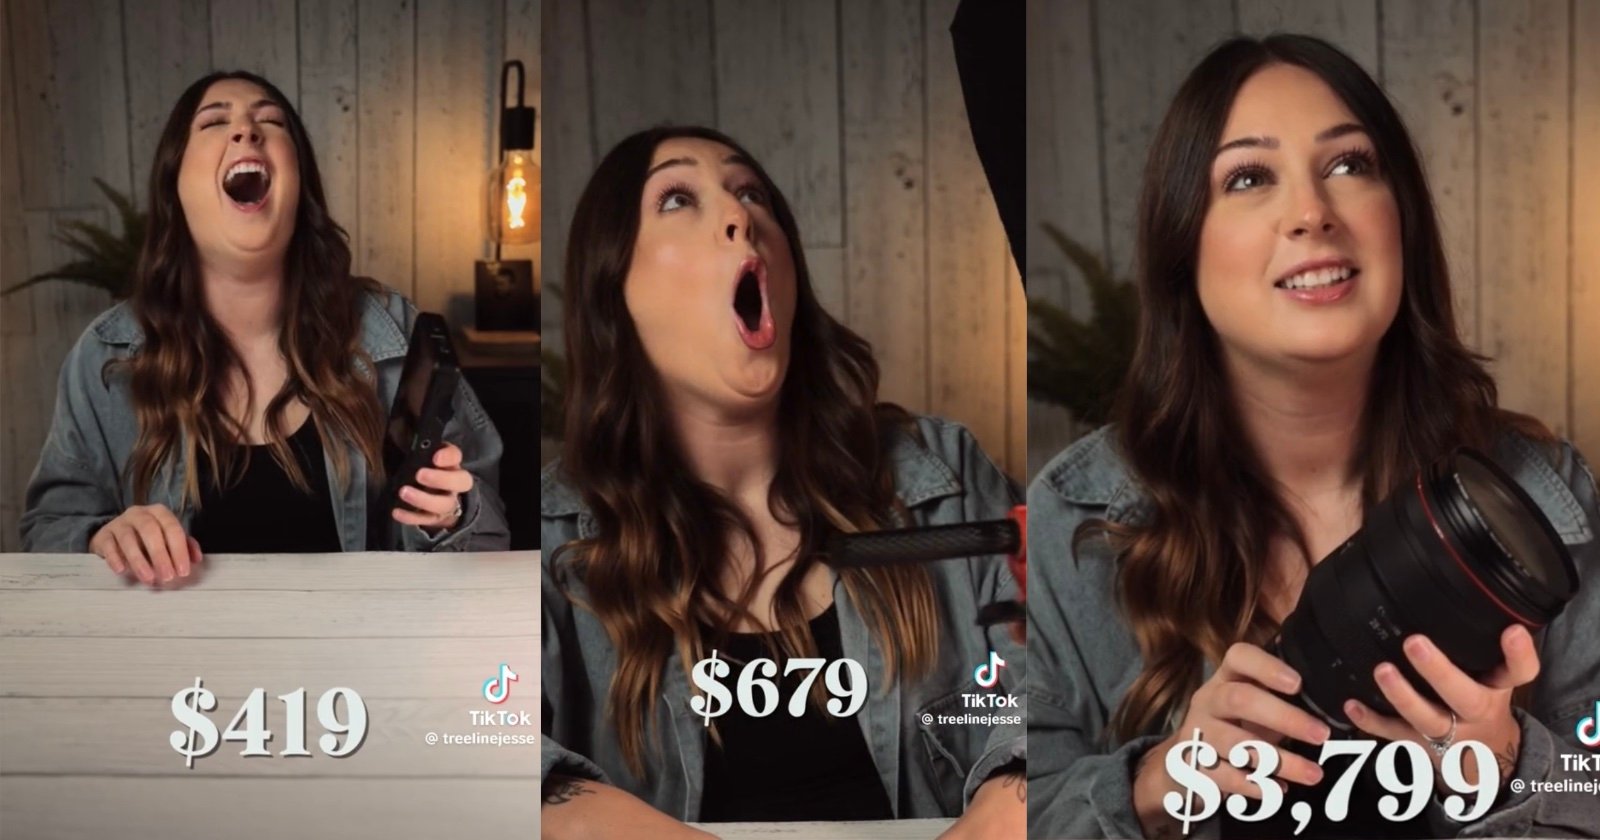 Photographers Wife is Left Stunned By Cost of His Camera Gear in Viral Video